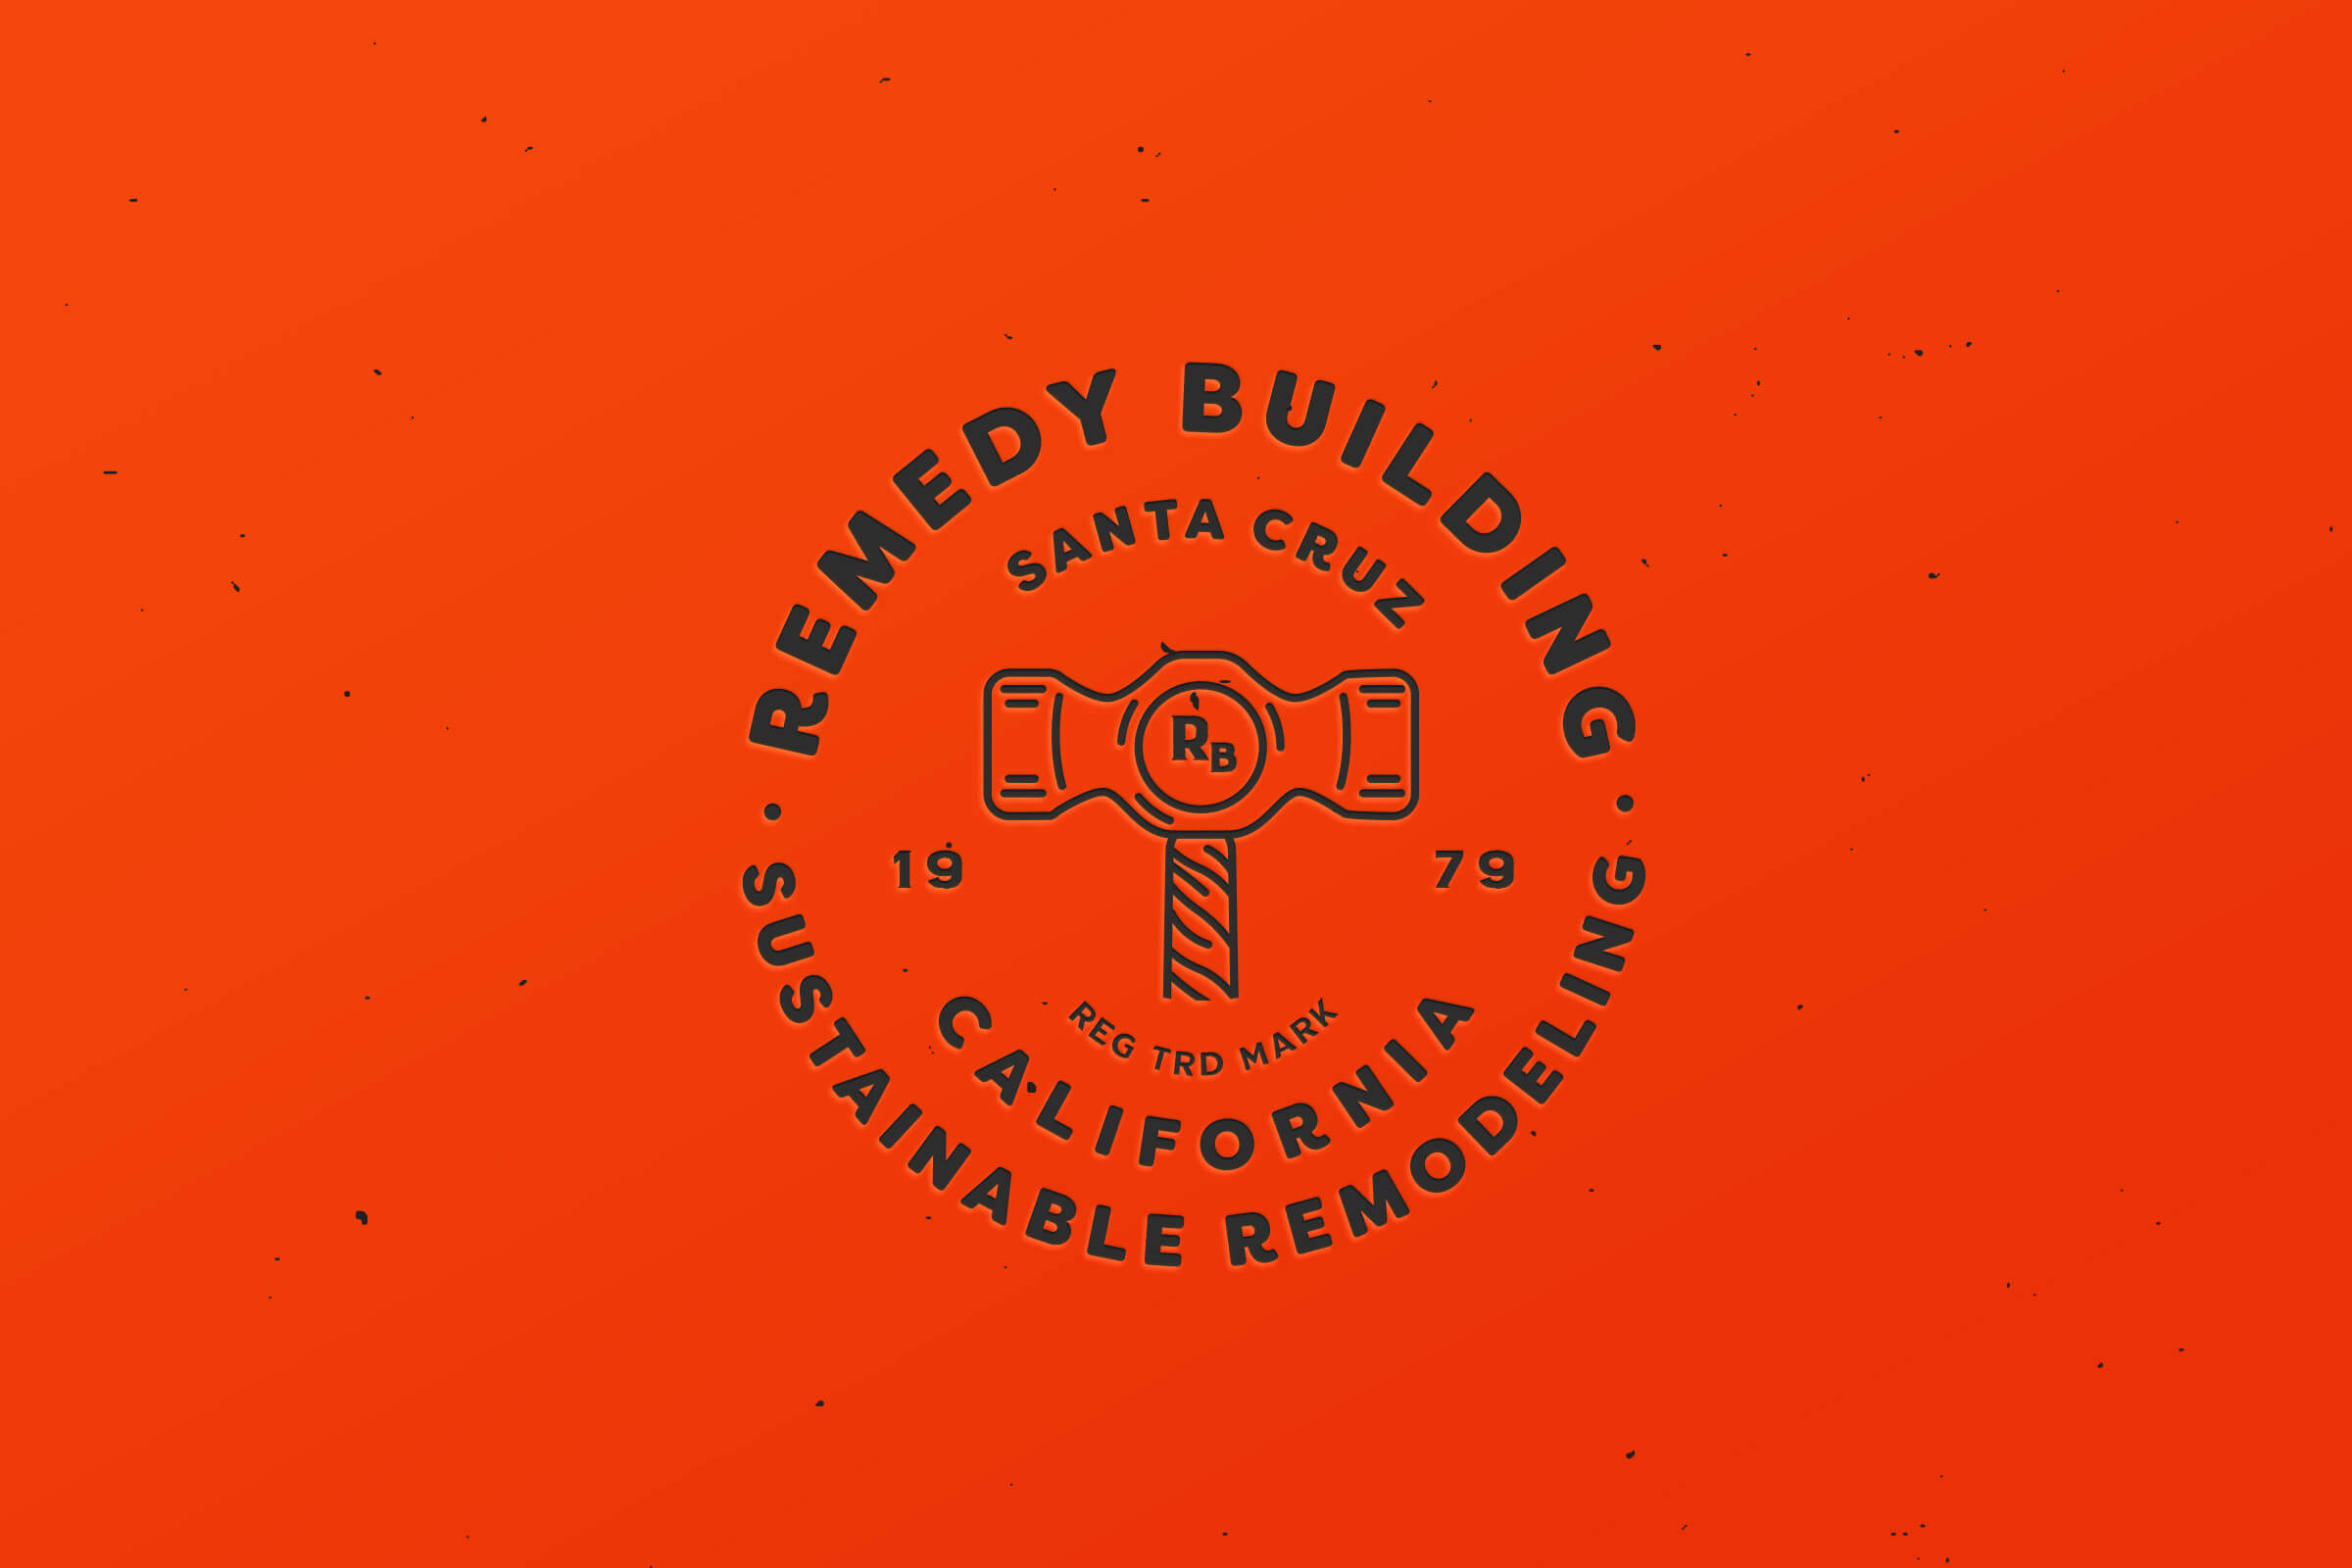 Remedy Building